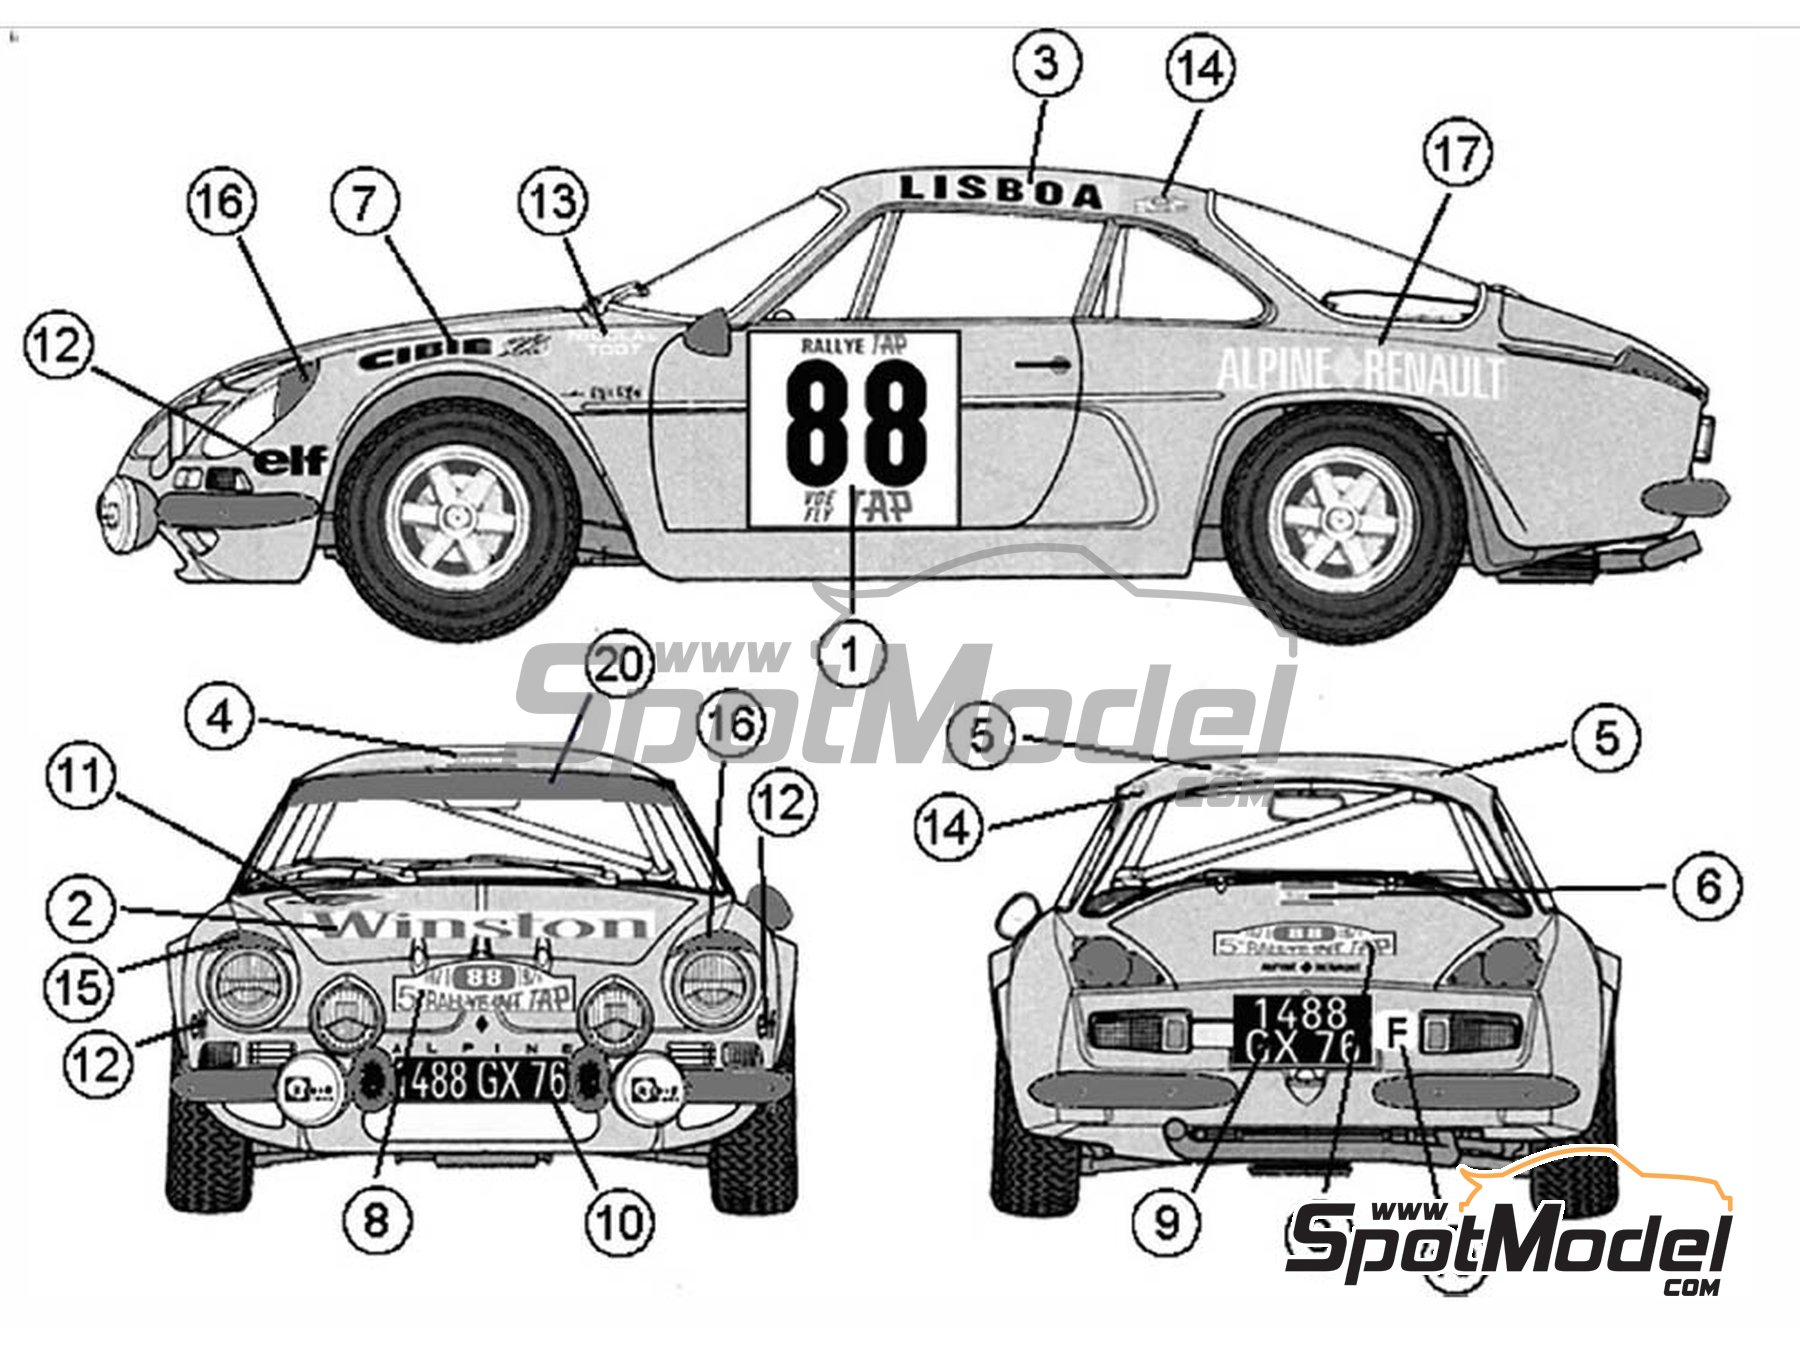 DECALS 1/43 REF 4322 ALPINE RENAULT A110 THERIER RAC RALLY 1970 GREAT BRITAIN 